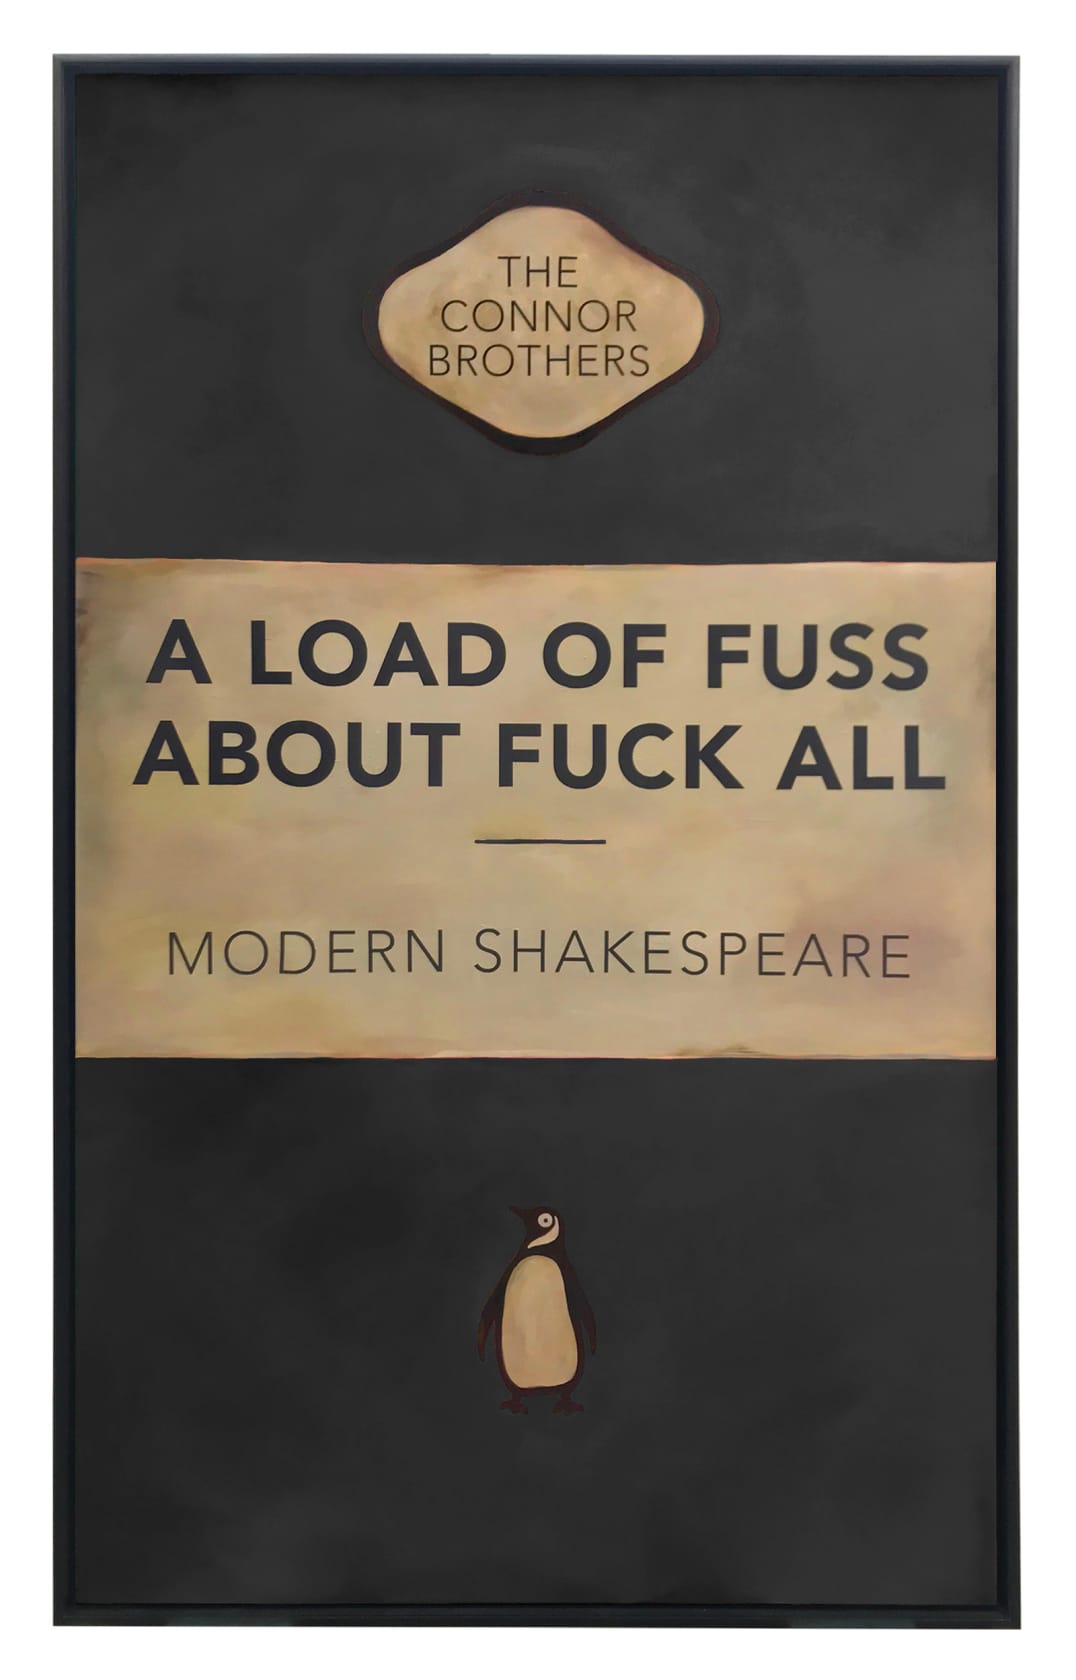 The Connor Brothers, A Load Of Fuss About Fuck All Grey, 2018